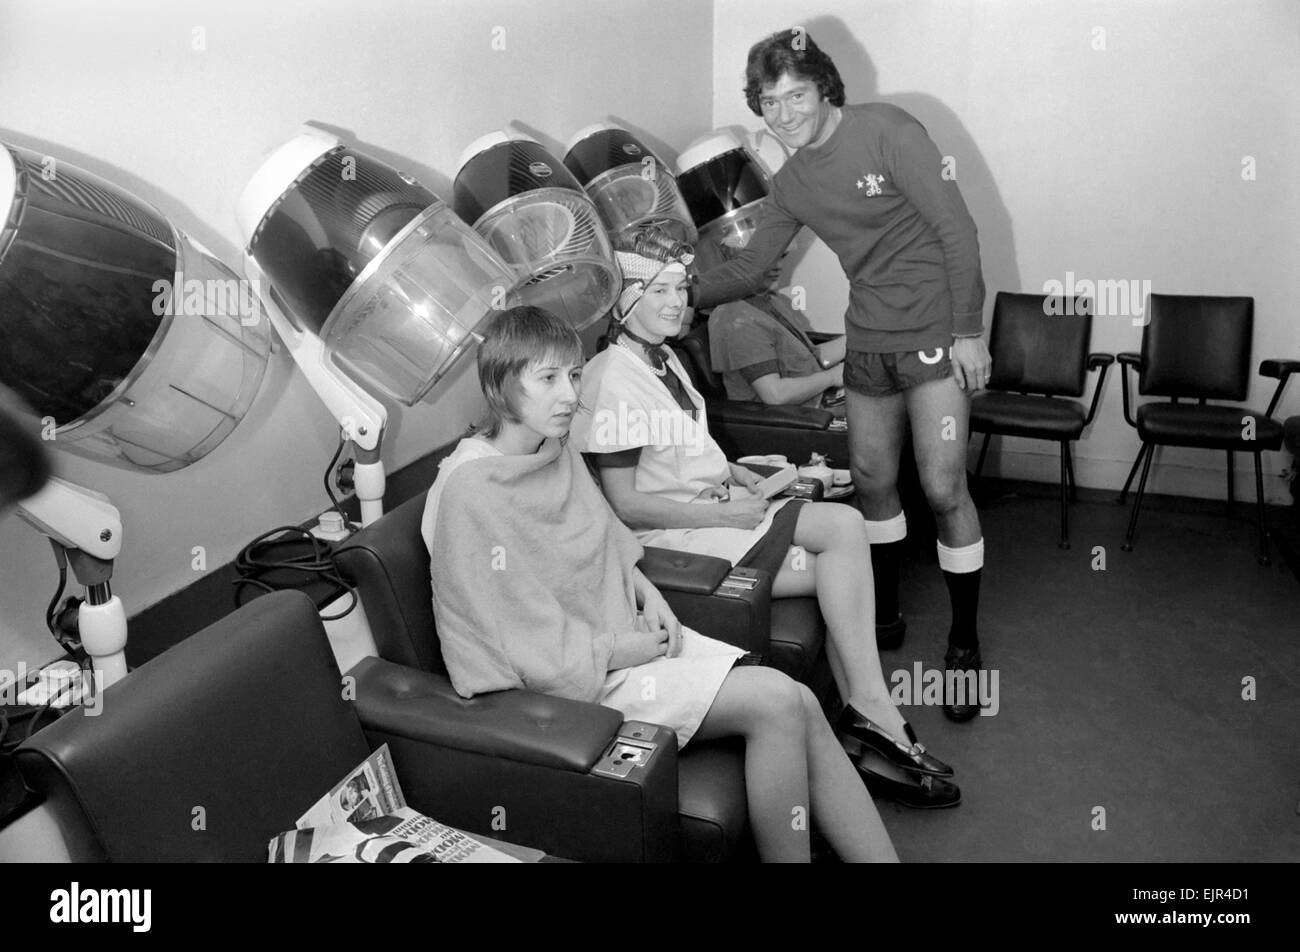 Football fan Vidal Sassoon made a solemn promise that if Chelsea reached the final of the Football League Cup the players and their wives would all get a free hair-do for the occasion. Chelsea are in the Final and Vidal kept this promise. Vidal Sassoon dressed in Chelsea's Football strip seen in the women's hairdressing salon attending to some clients . March 1972 72-2010-011 Stock Photo